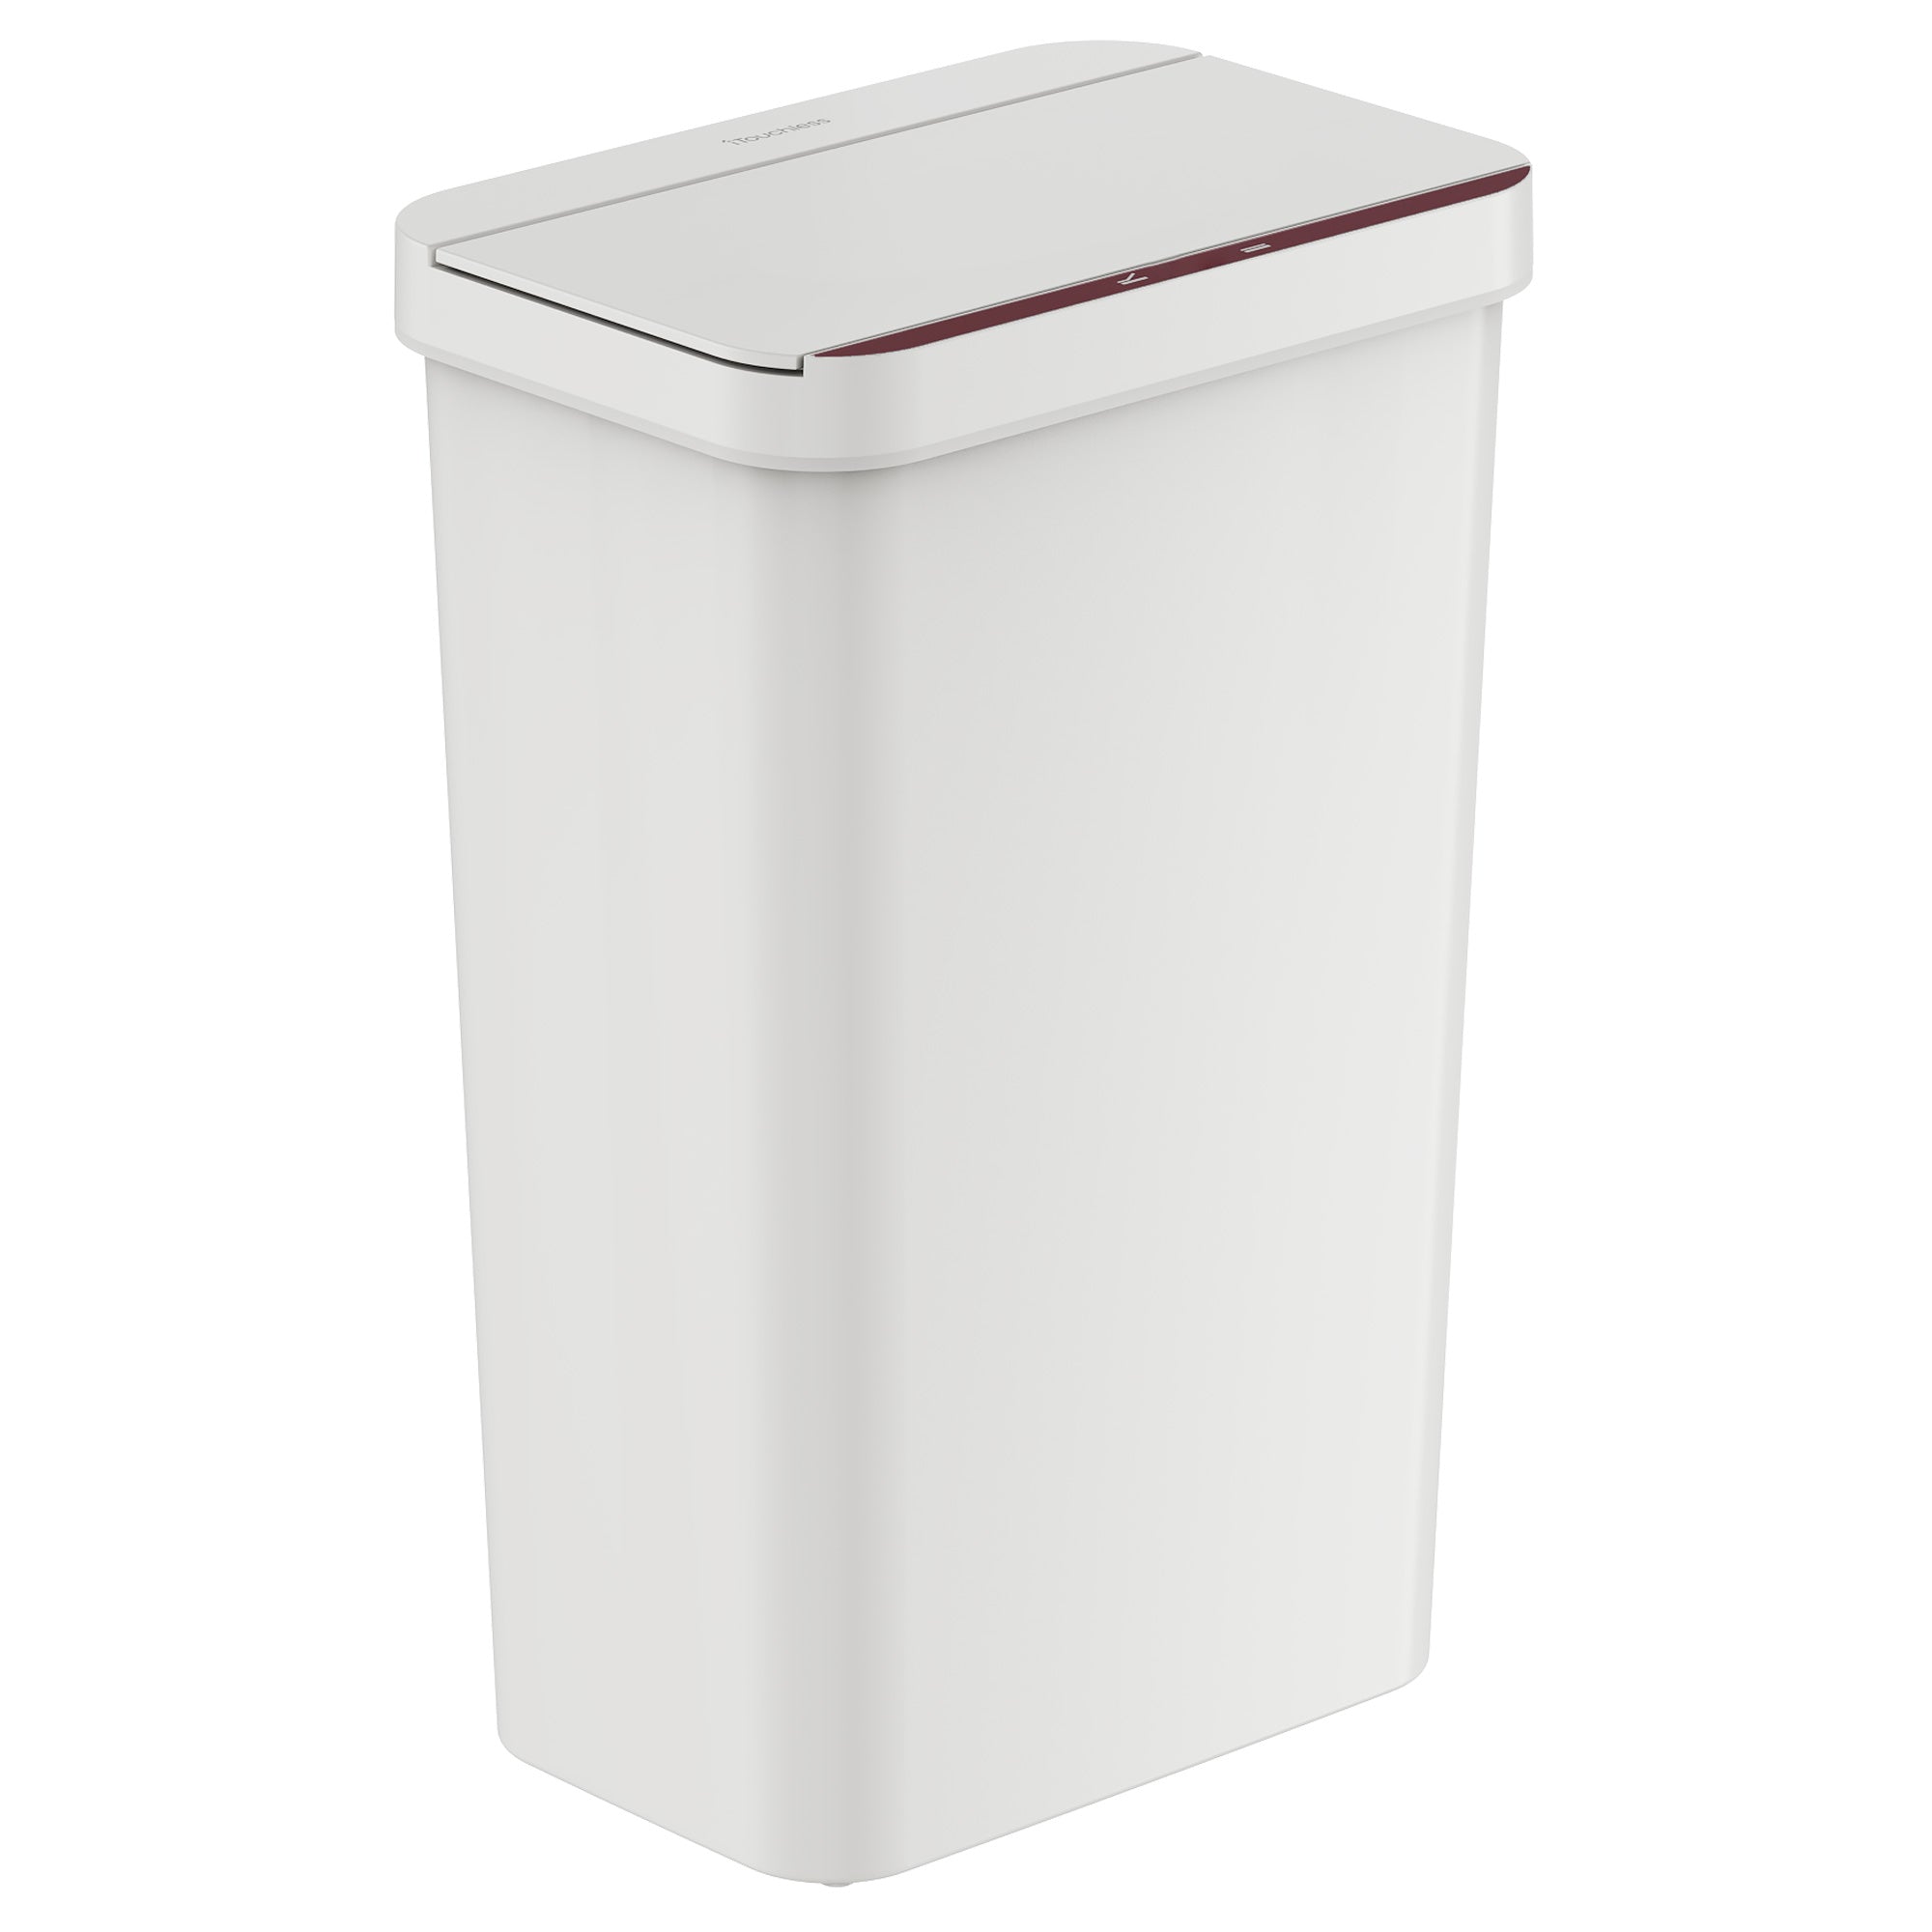 Hardware Resources 35 Qt White Birch Trash Can, Gray CAN-WBMD35G